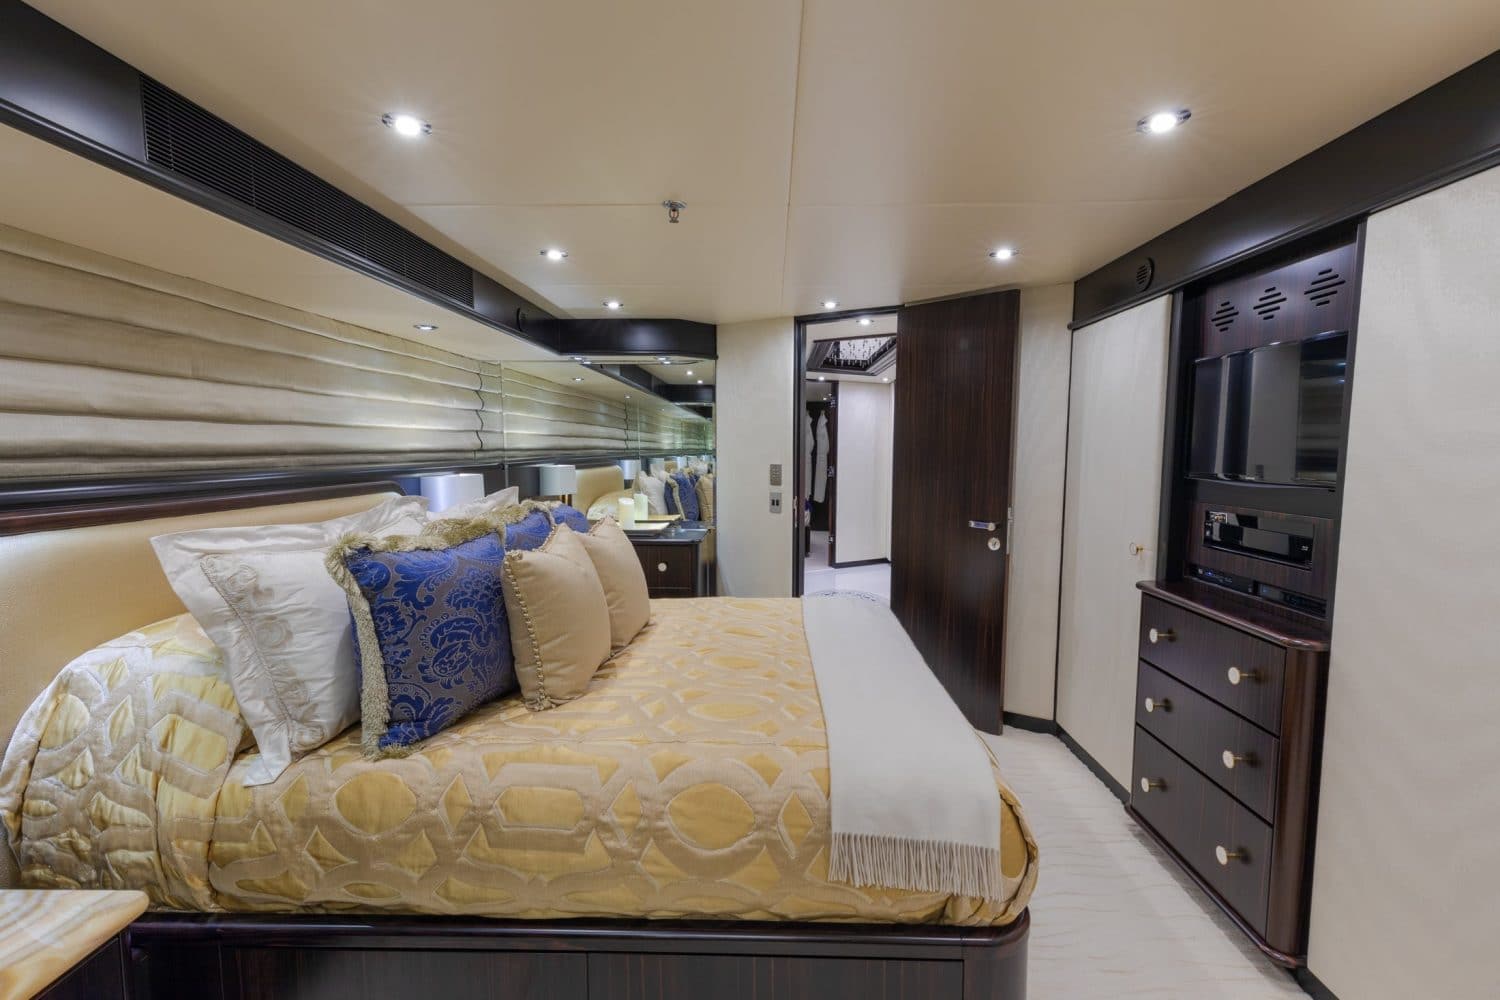 142' Christensen Lady Bee Guest Stateroom